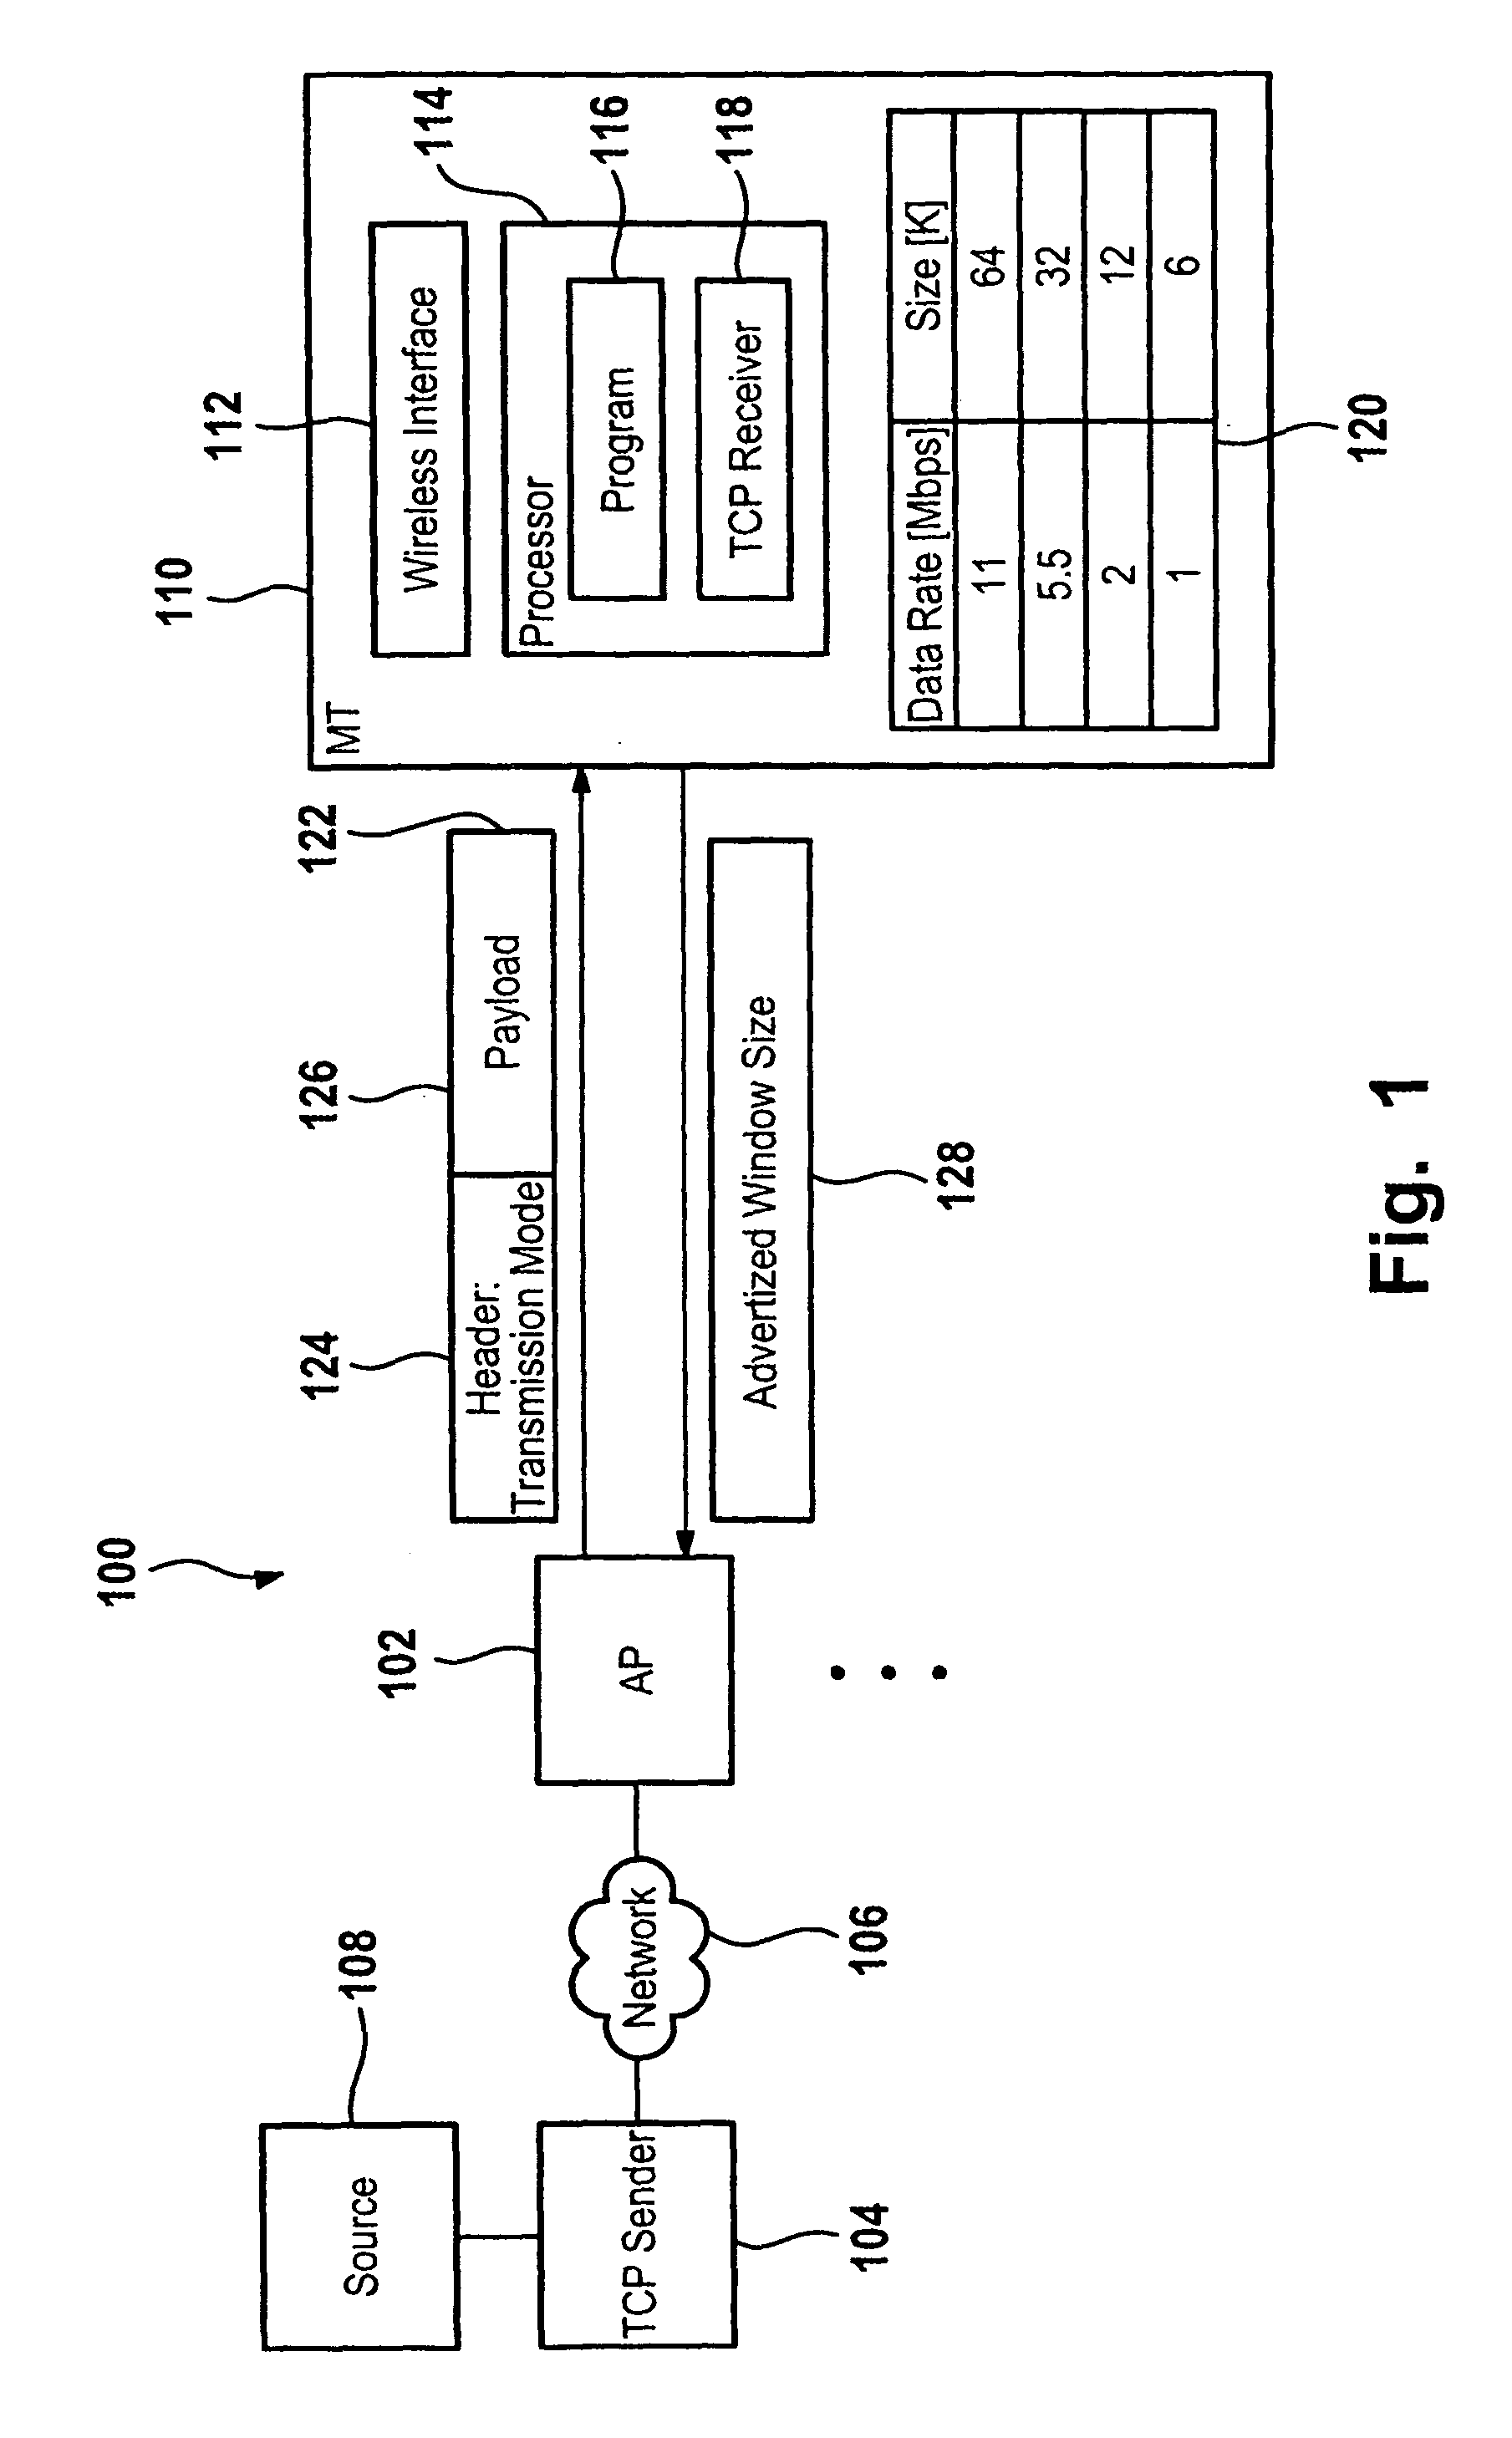 Wireless mobile terminal and telecommunication system